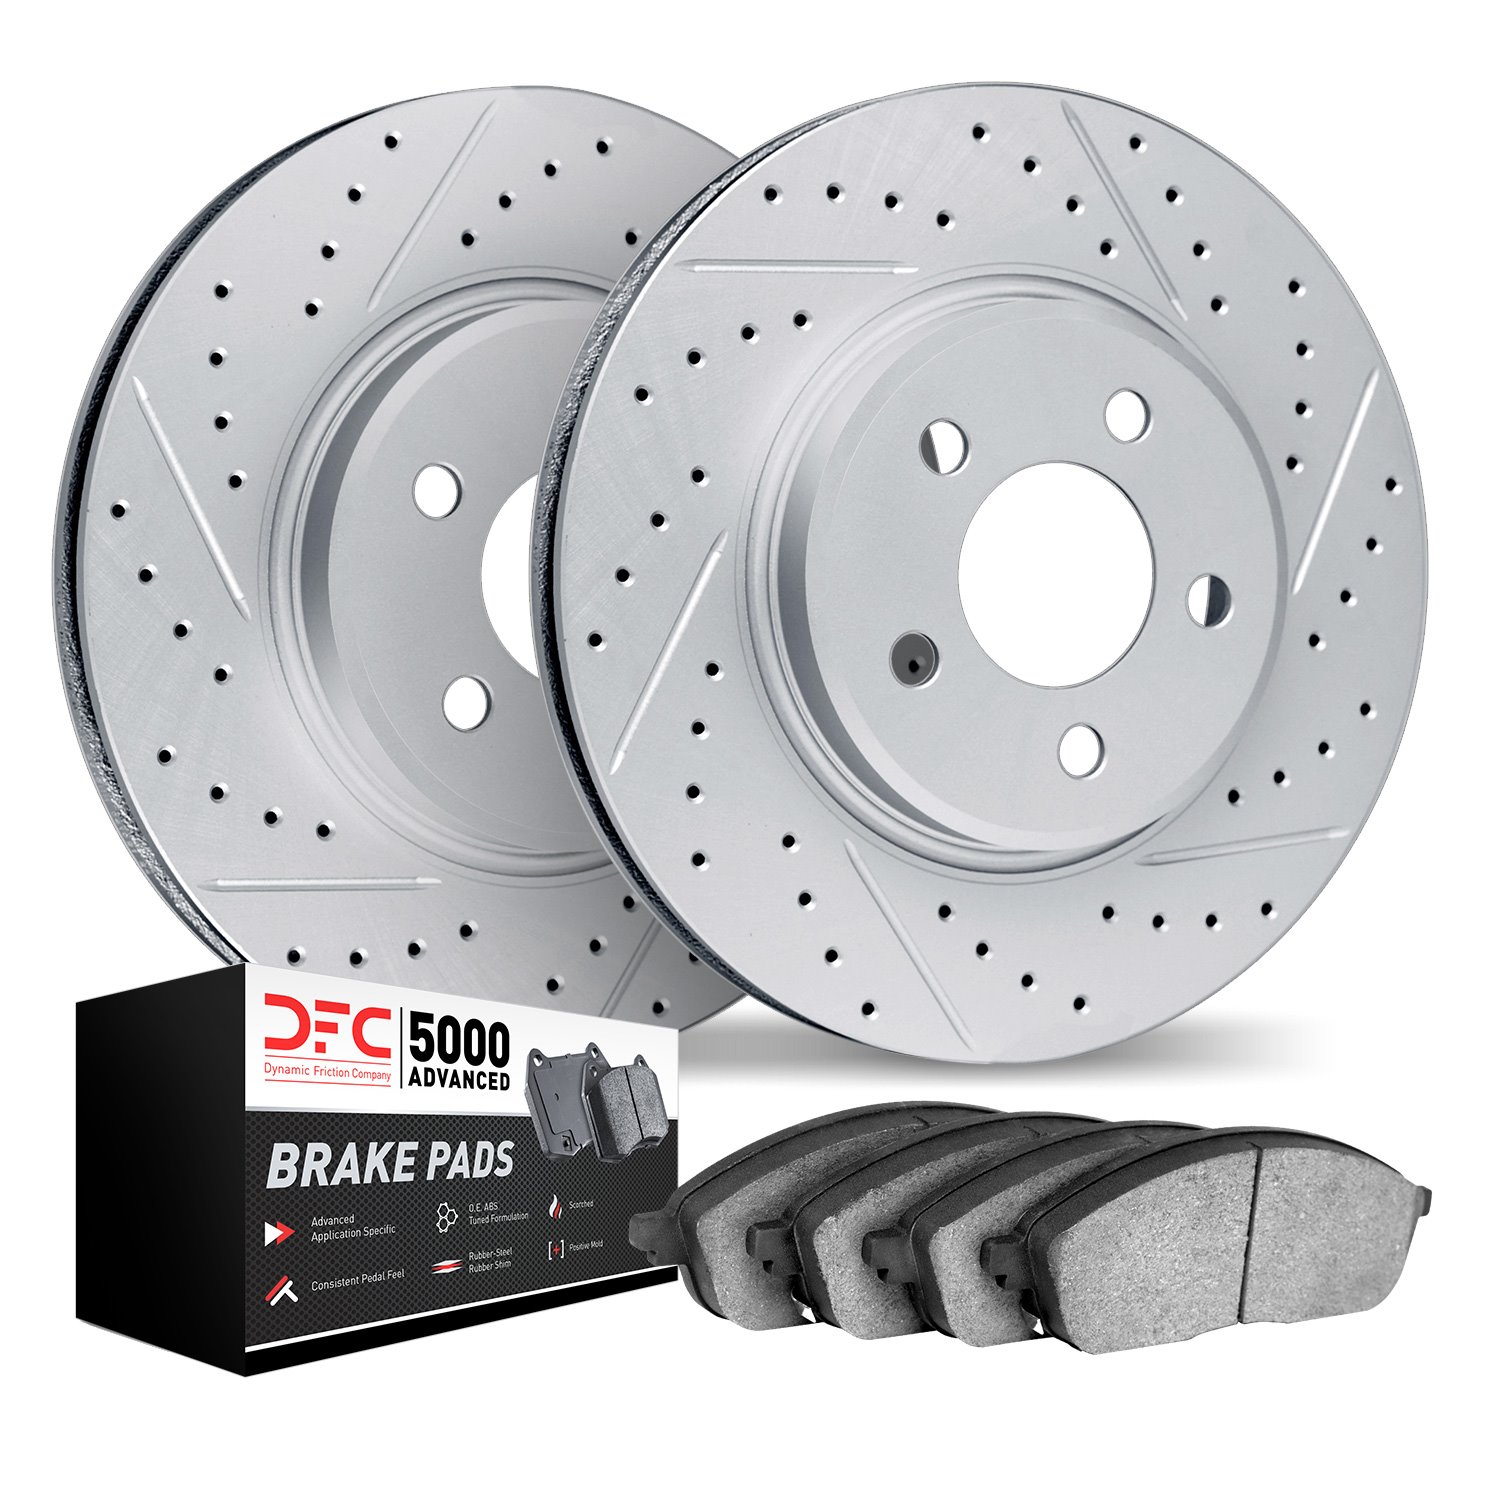 2502-02002 Geoperformance Drilled/Slotted Rotors w/5000 Advanced Brake Pads Kit, 1967-1977 Porsche, Position: Front